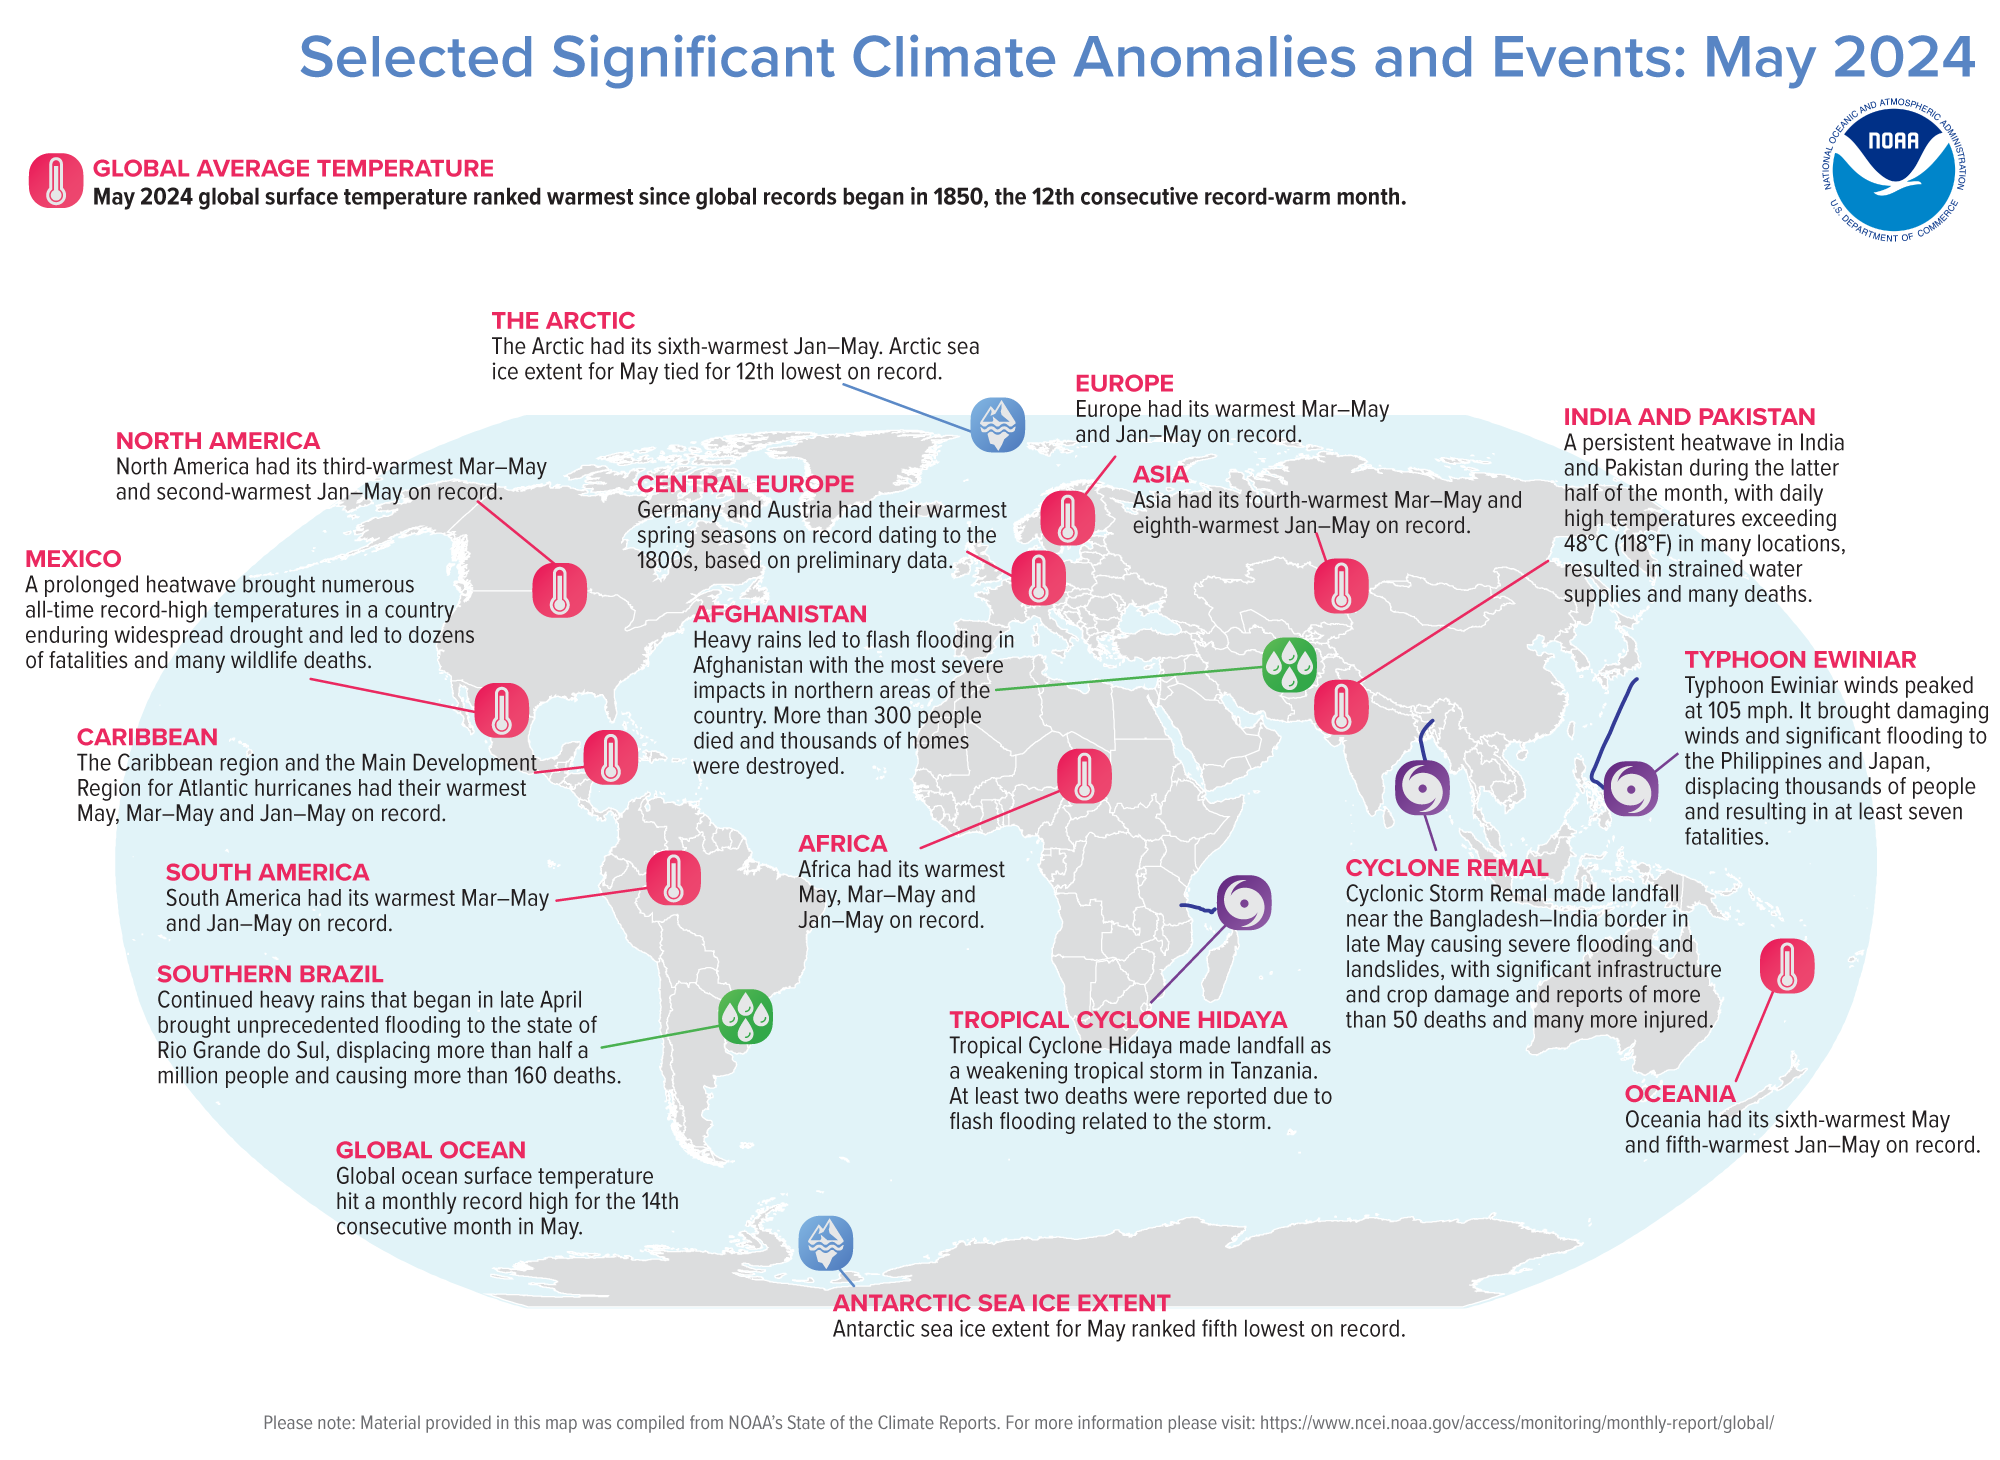 May 2024 Selected Climate Anomalies and Events Map